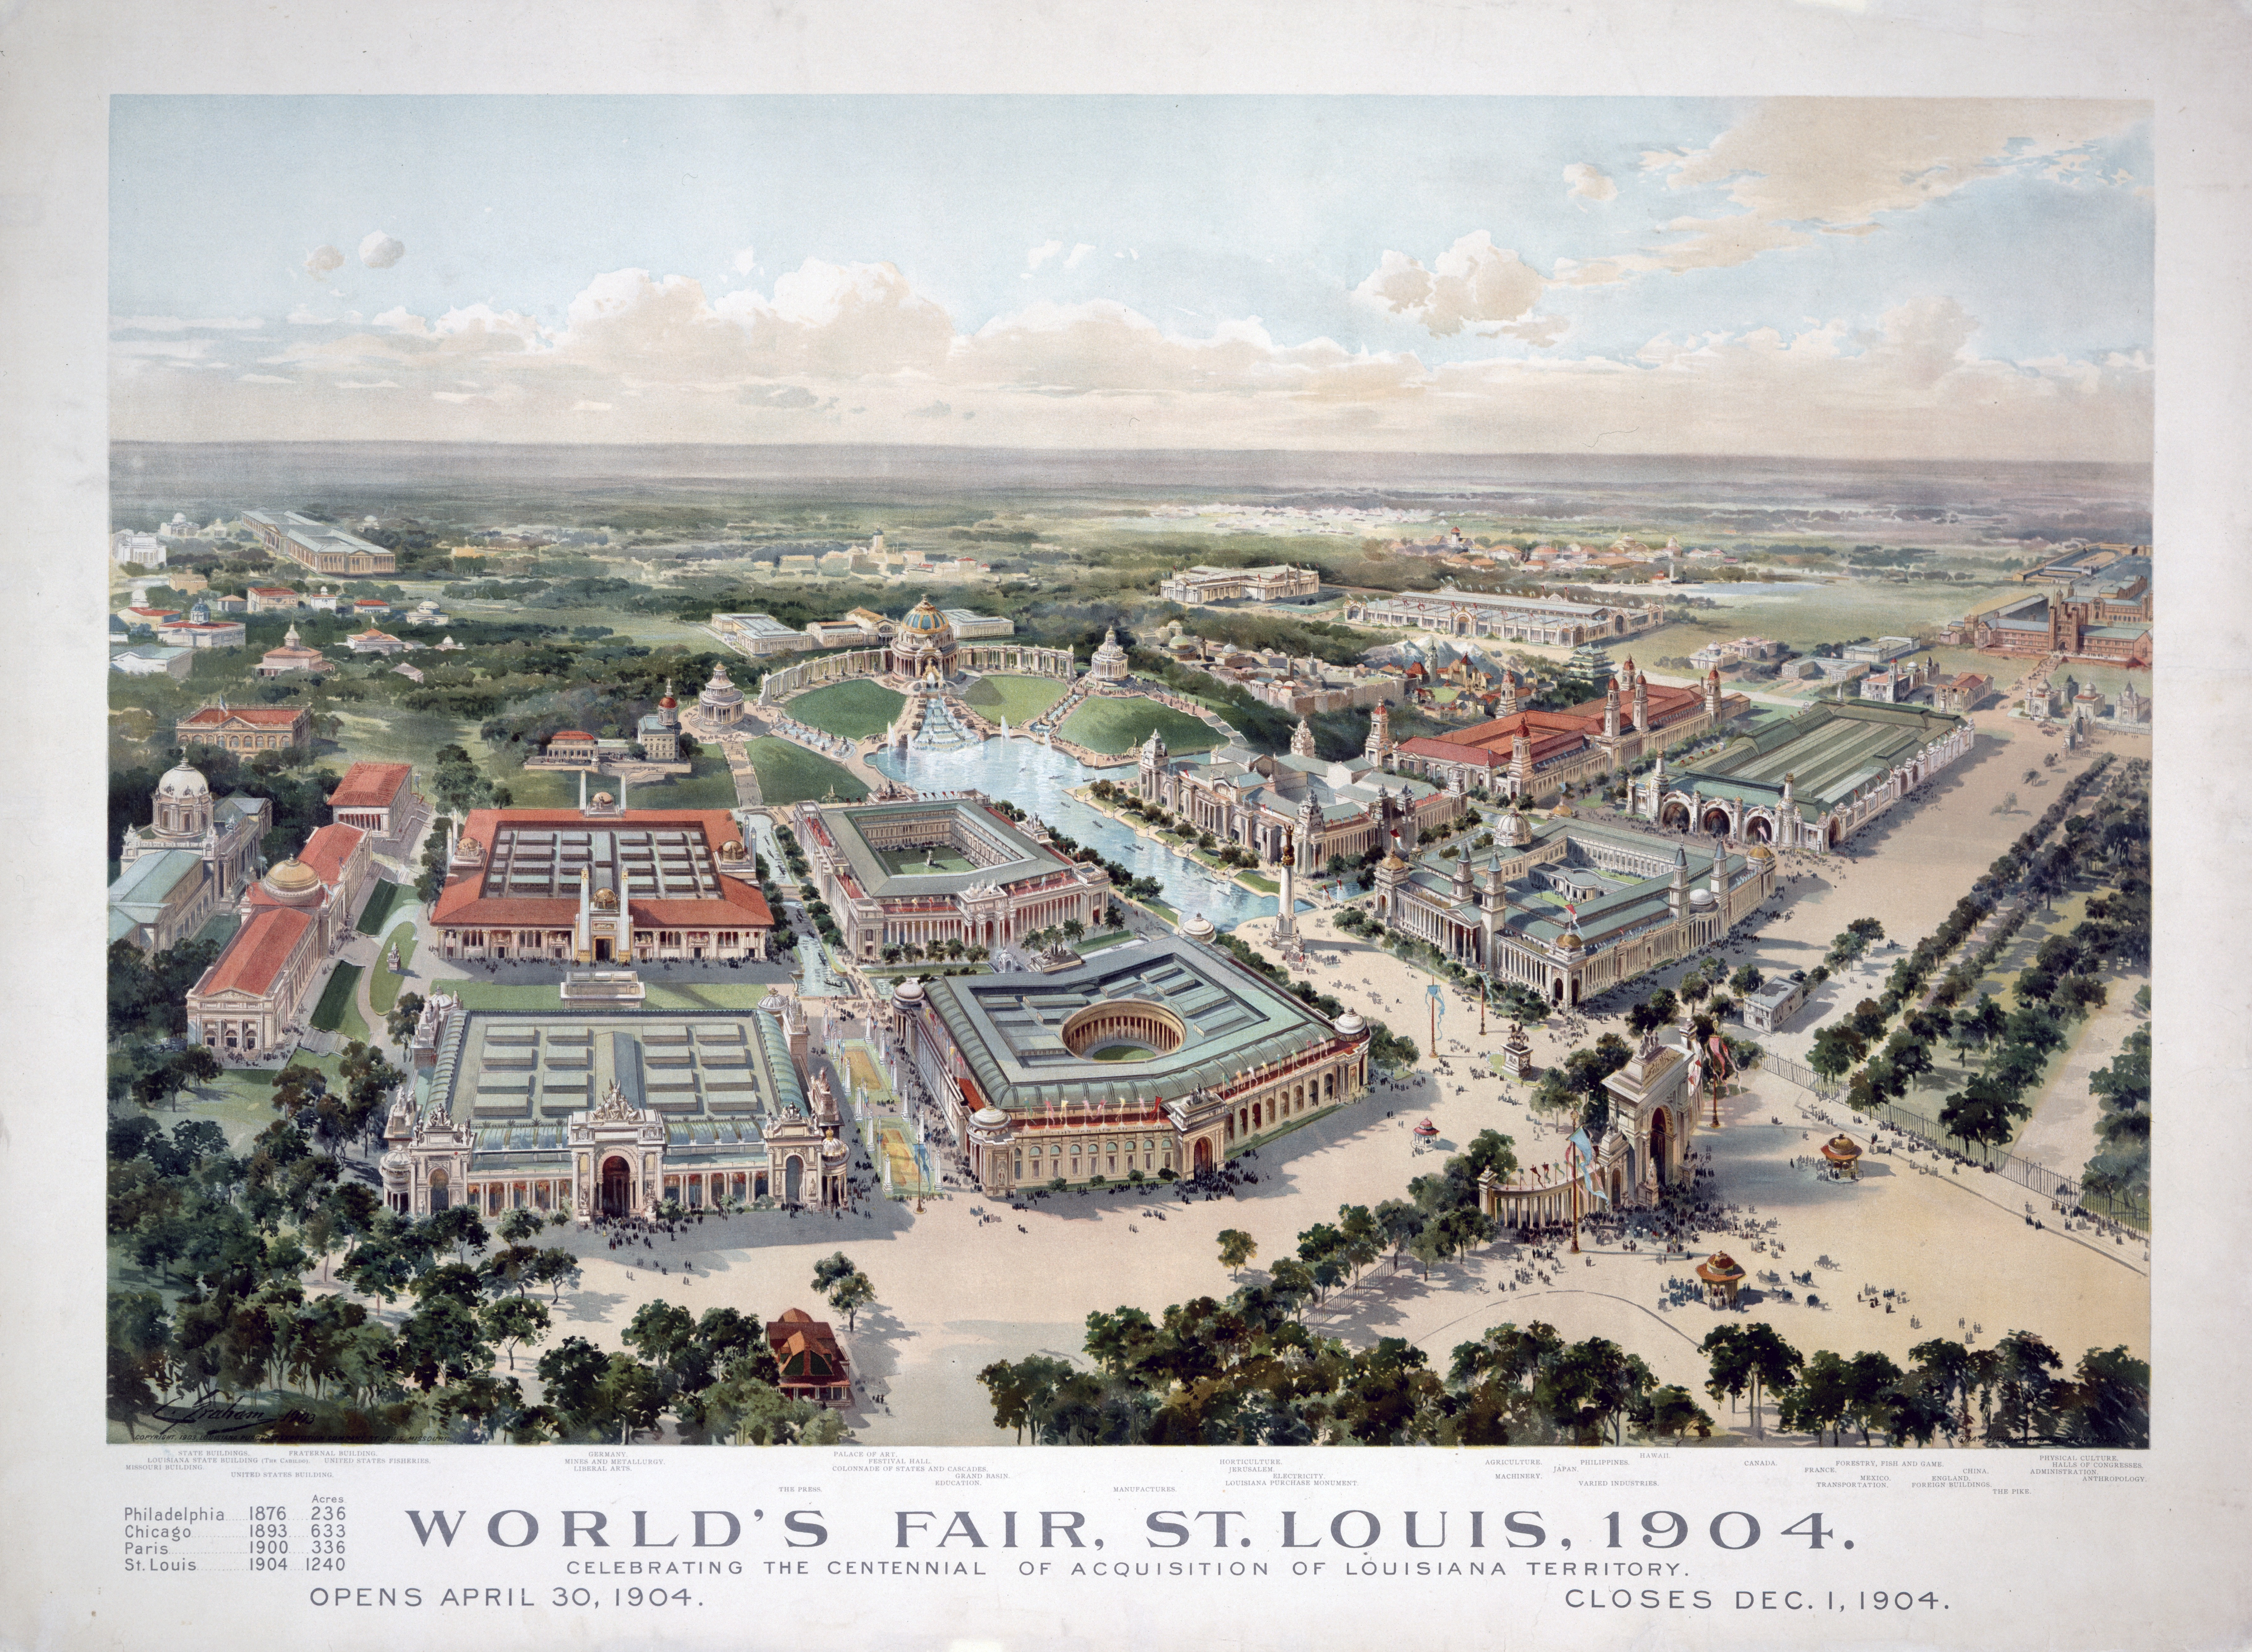 St Louis World/'s Birdseye View Grounds 1904 Fair Expo Lithoview Stereoview E70